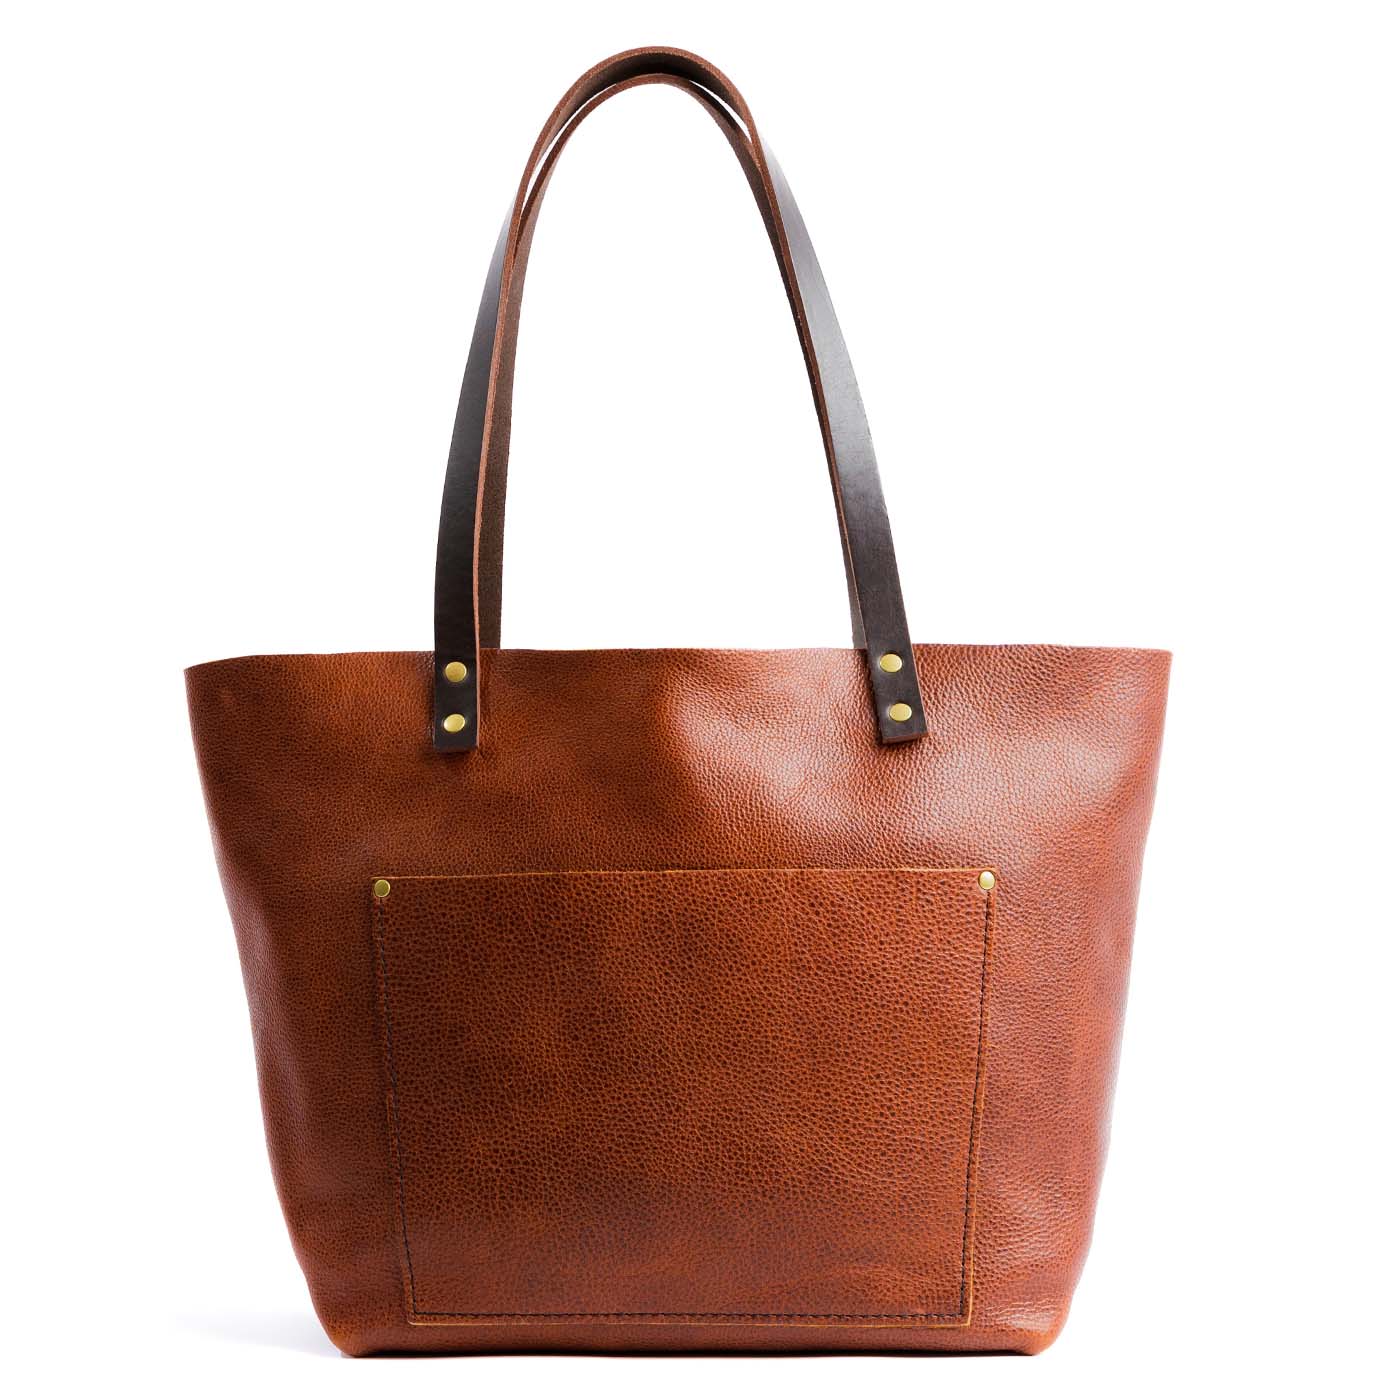 THE MEDIUM PERFECT TRAVEL TOTE - FULL LEATHER COLLECTION - CAFE